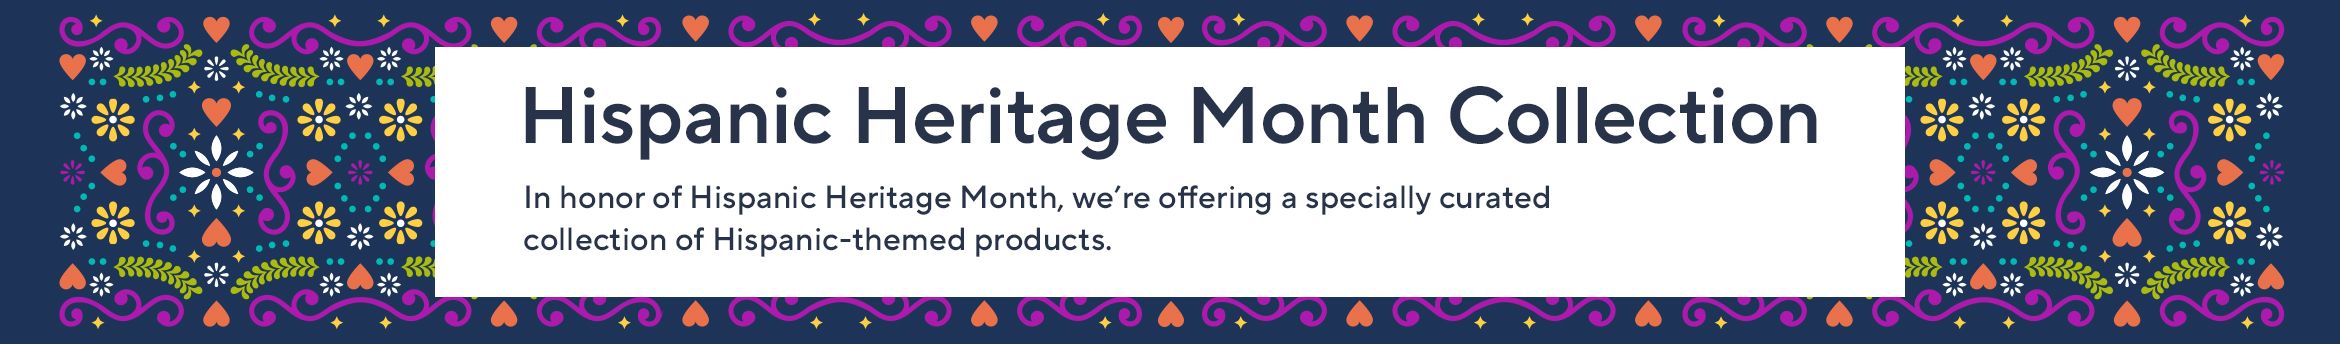 Hispanic Heritage Month Collection: In honor of Hispanic Heritage Month, we’re offering a specially curated collection of Hispanic-themed products. 